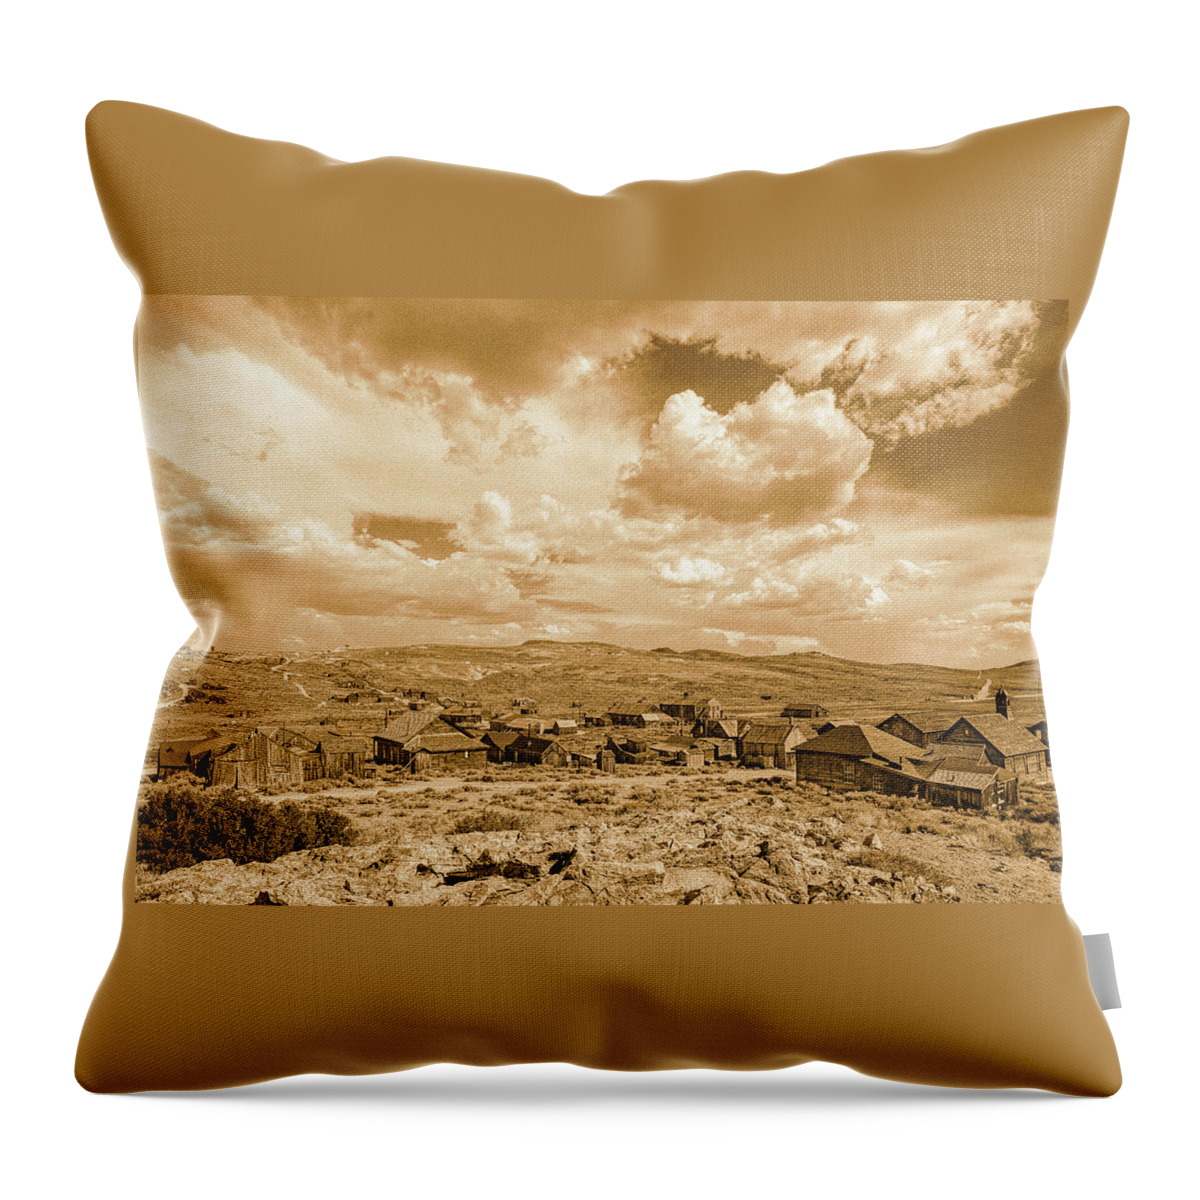 Bodie Throw Pillow featuring the photograph Downtown Bodie Sepia by Ron Long Ltd Photography